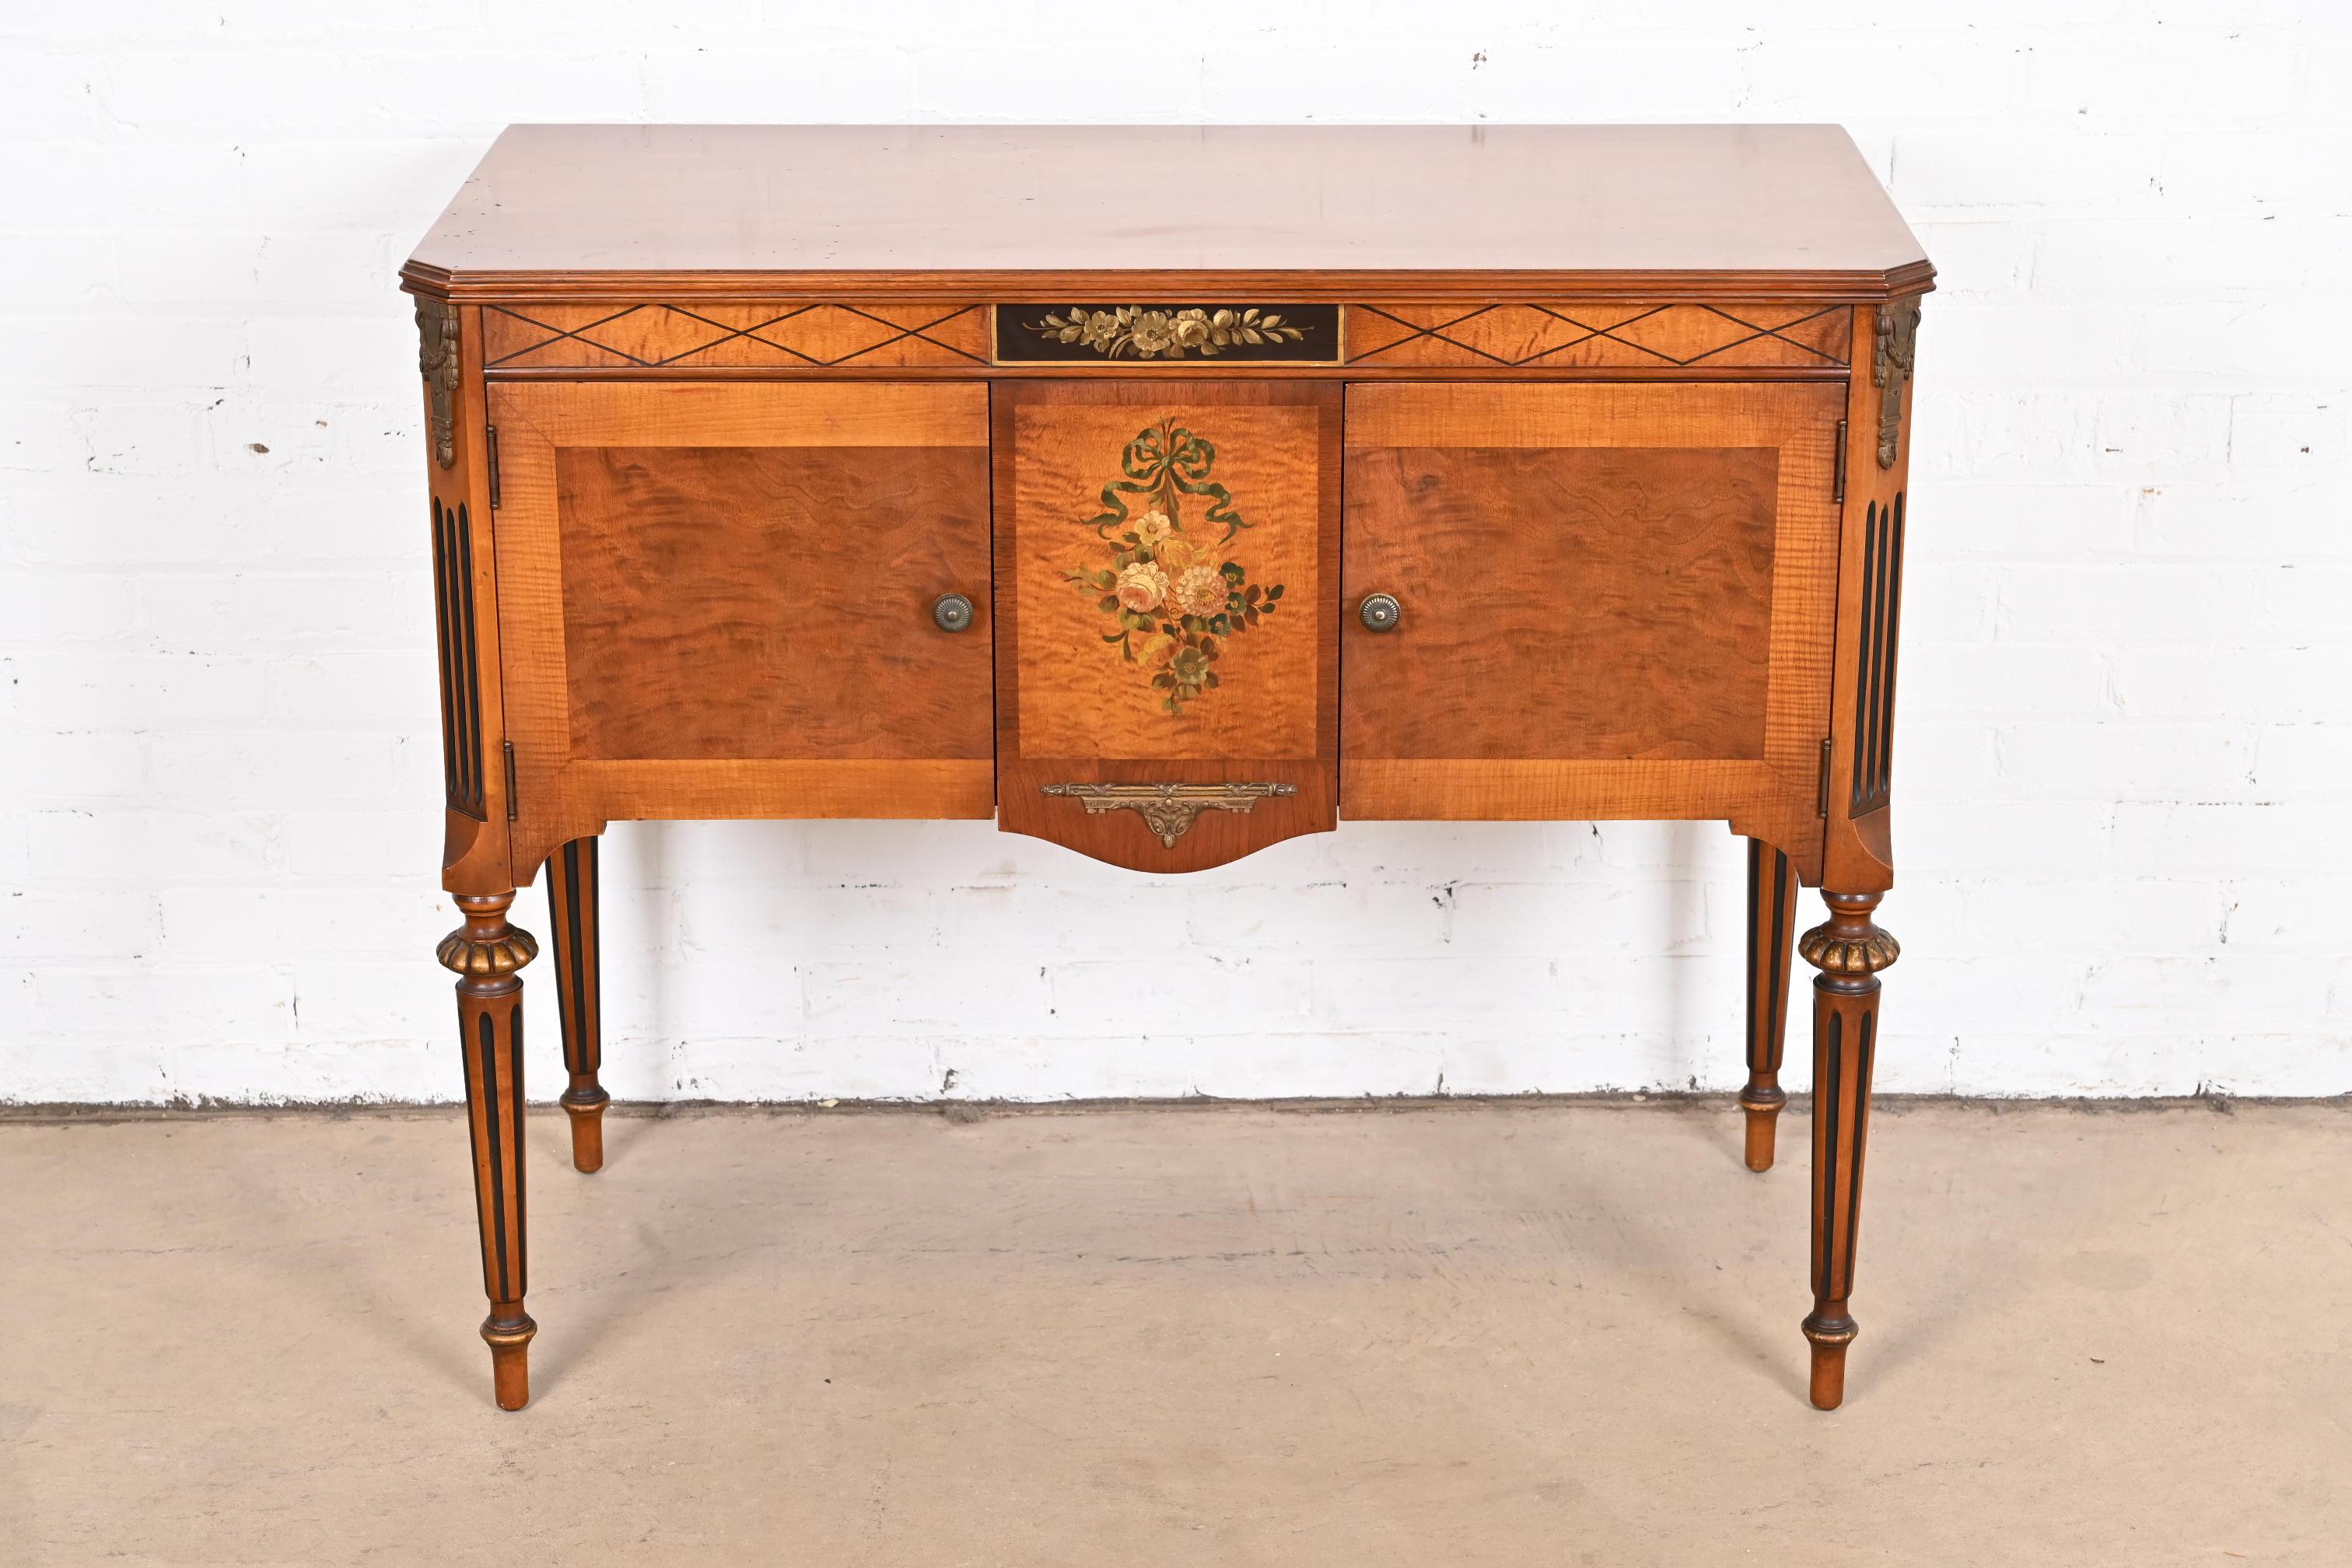 An exceptional French Regency Louis XVI style sideboard, buffet server, or bar cabinet

In the manner of Romweber

USA, Circa 1920s

Carved walnut, with inlaid satinwood, ebonized and gold gilt details, original brass hardware and mounted